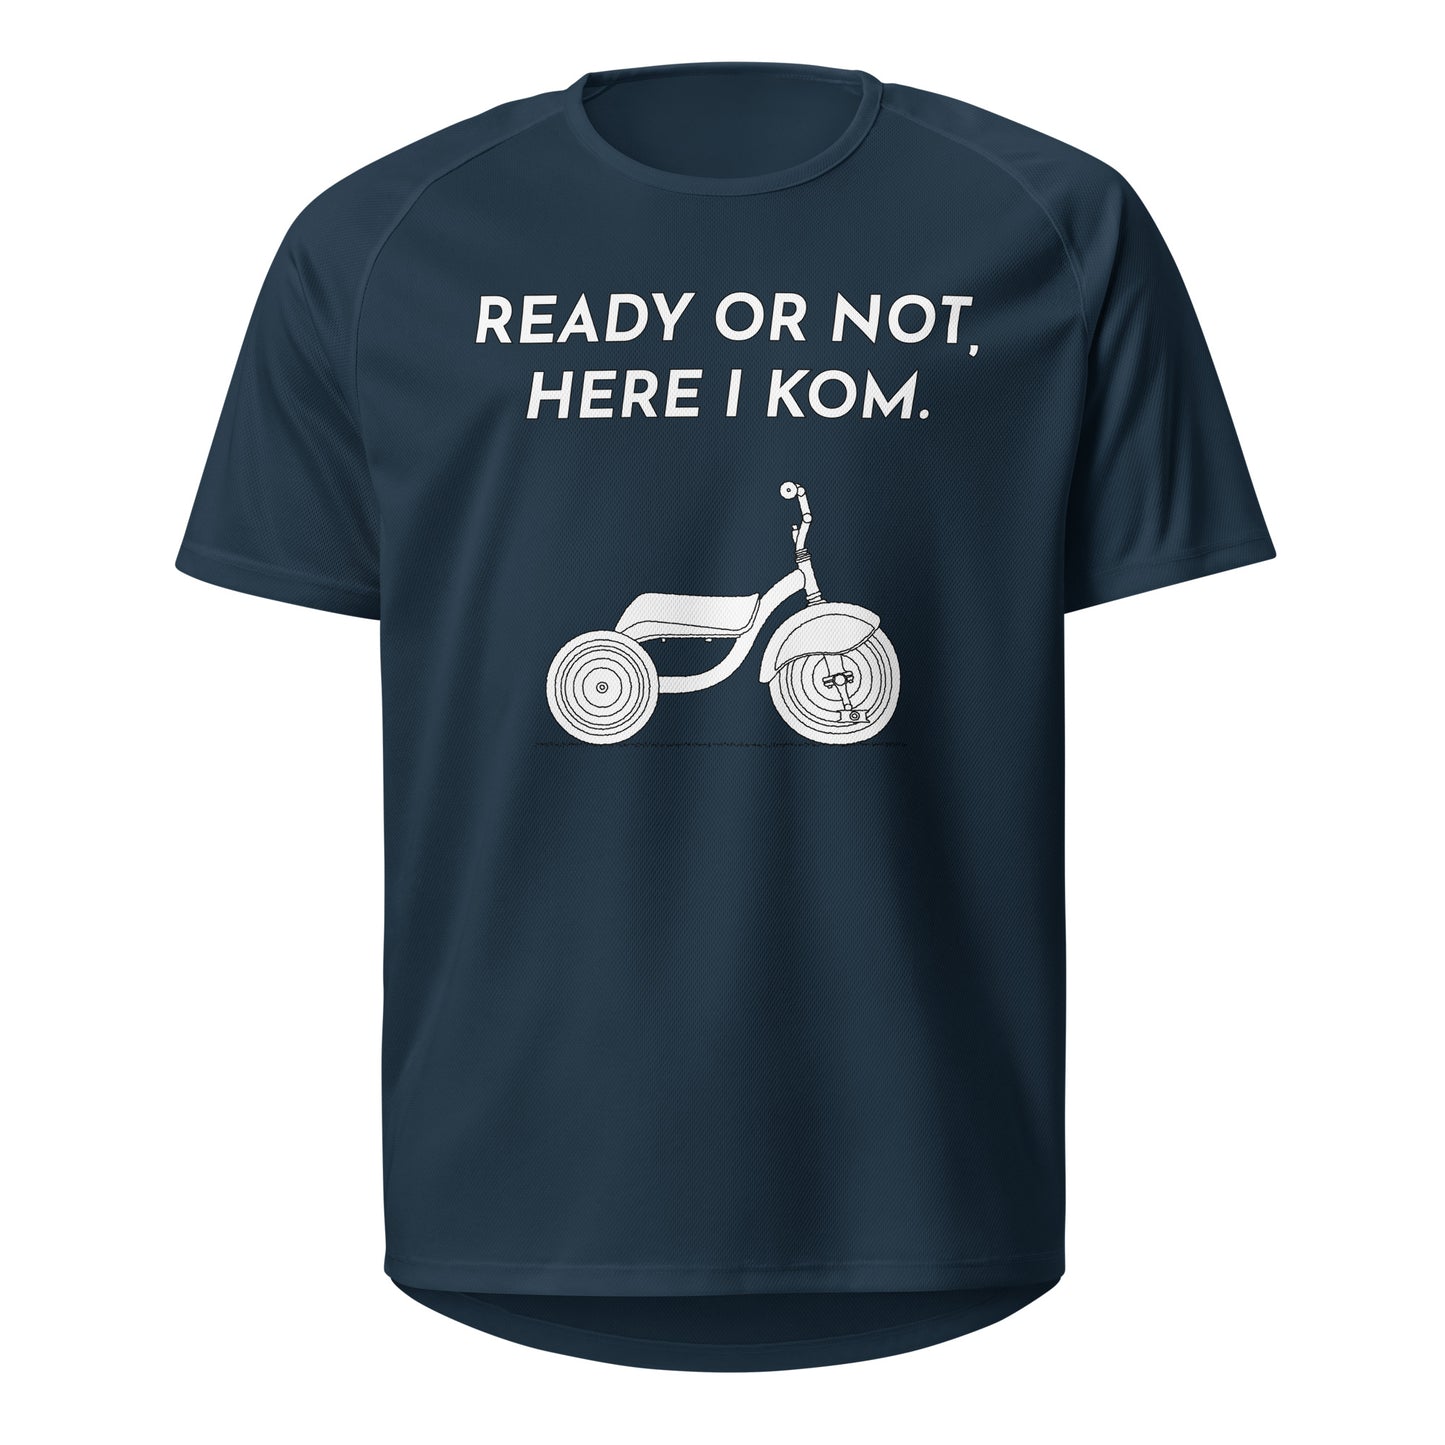 Ready Or Not Here I KOM, Tricycle Sports Jersey, Adult Cyclist